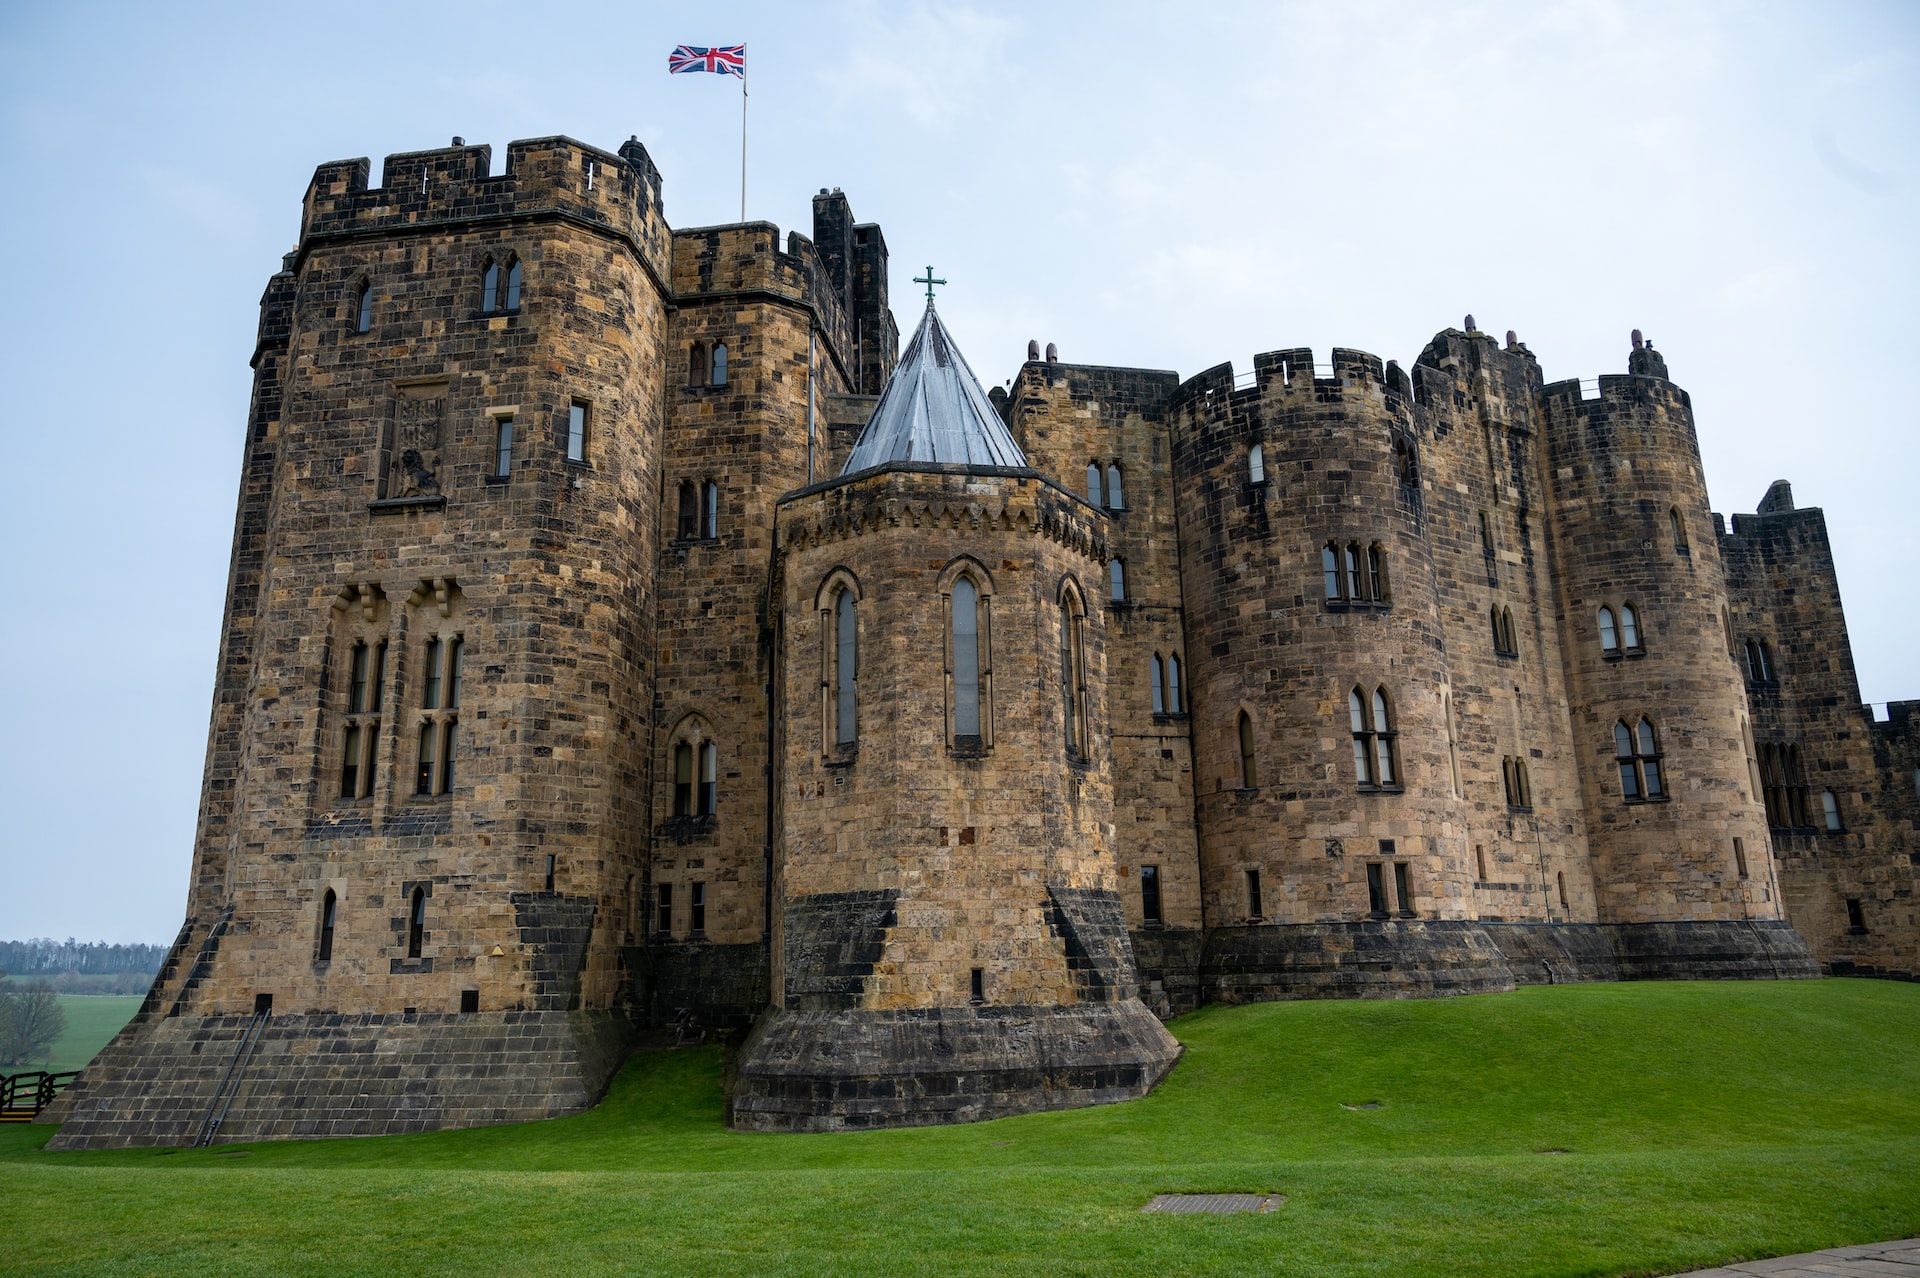 Alnwick Castle with a British Jack flag flying high over the ramparts.